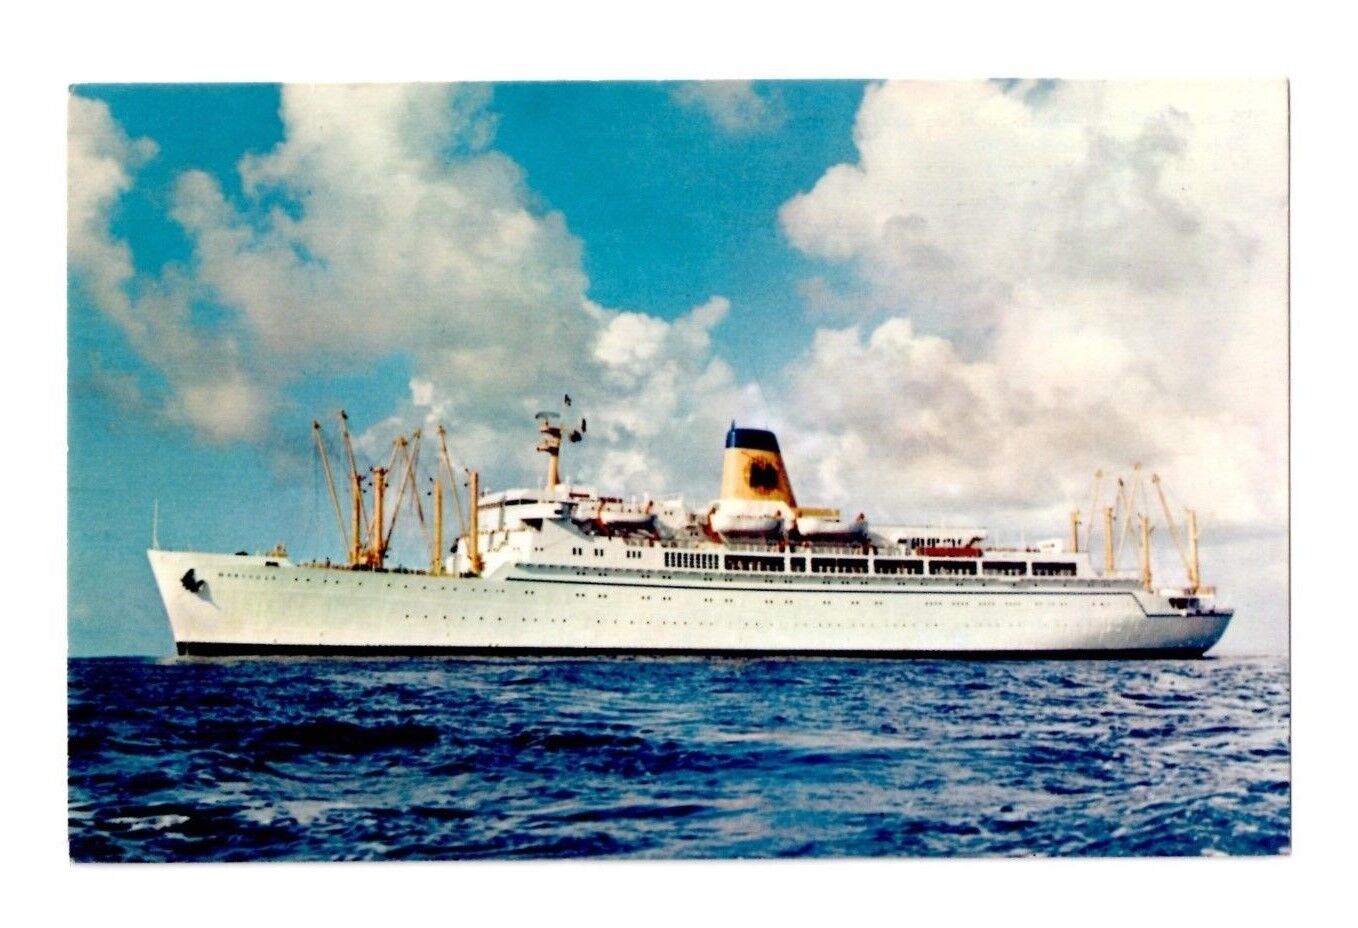 SS Monterey Matson Lines Luxury Liner Launched October 1931 Postcard Un-posted